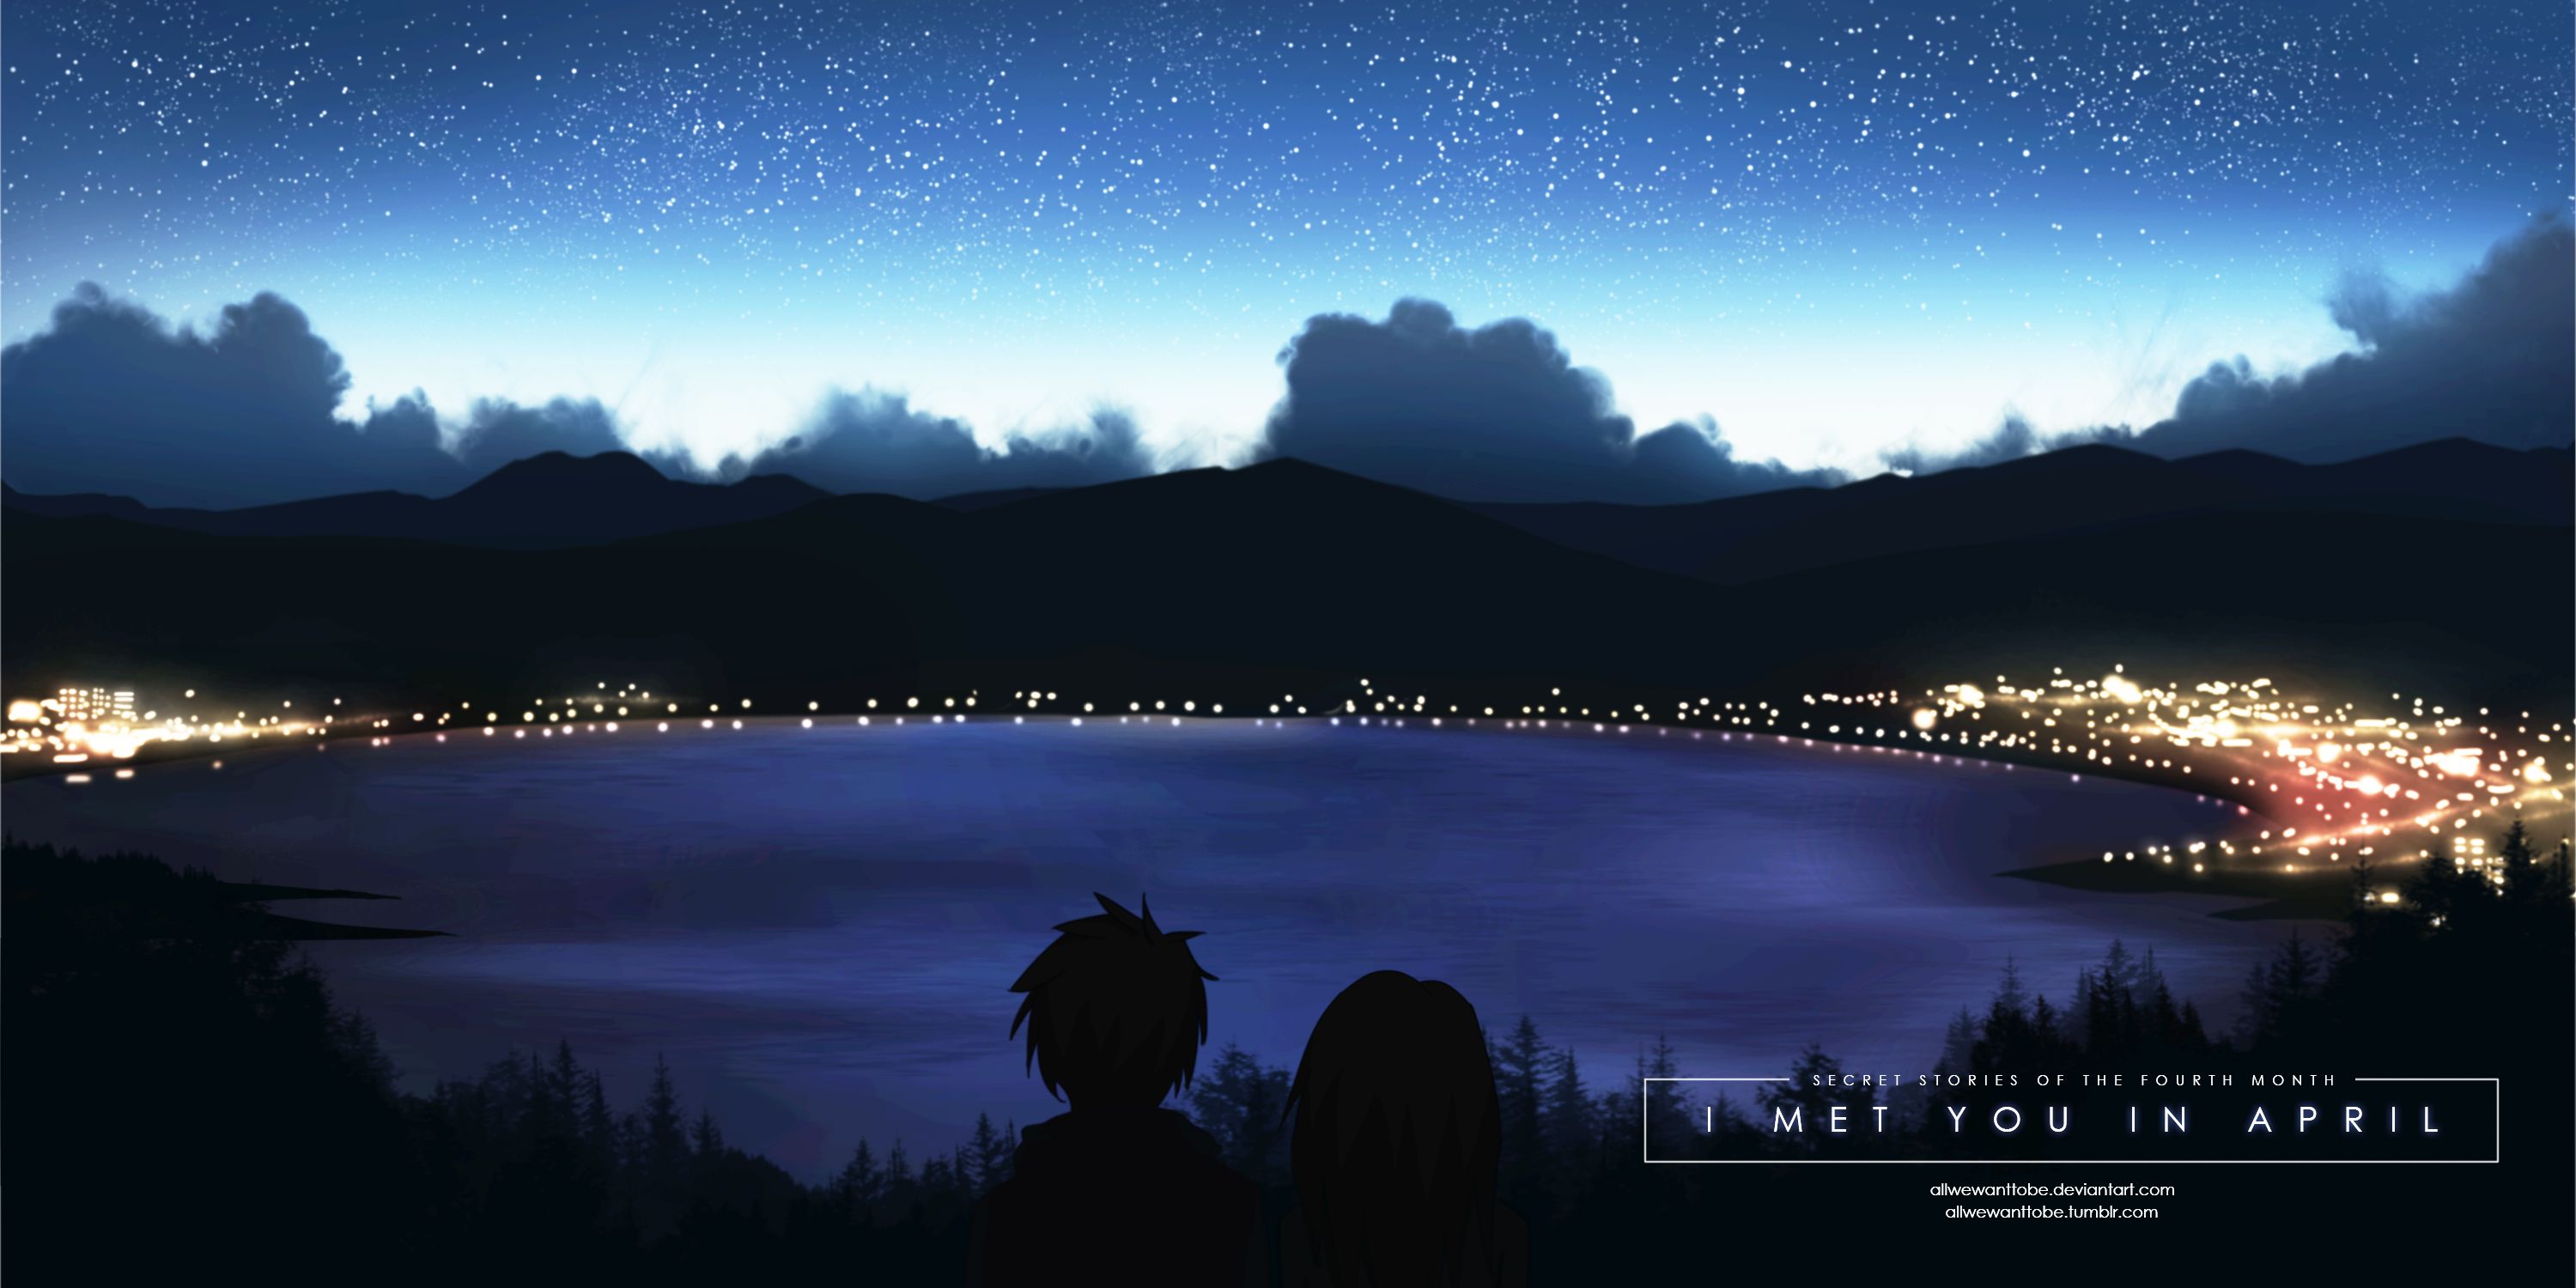 anime scenery of a sunset over a lake with a mountain in the background,  beautiful anime scenery, anime landscape wallpaper, anime scenery,  beautiful anime scene - SeaArt AI